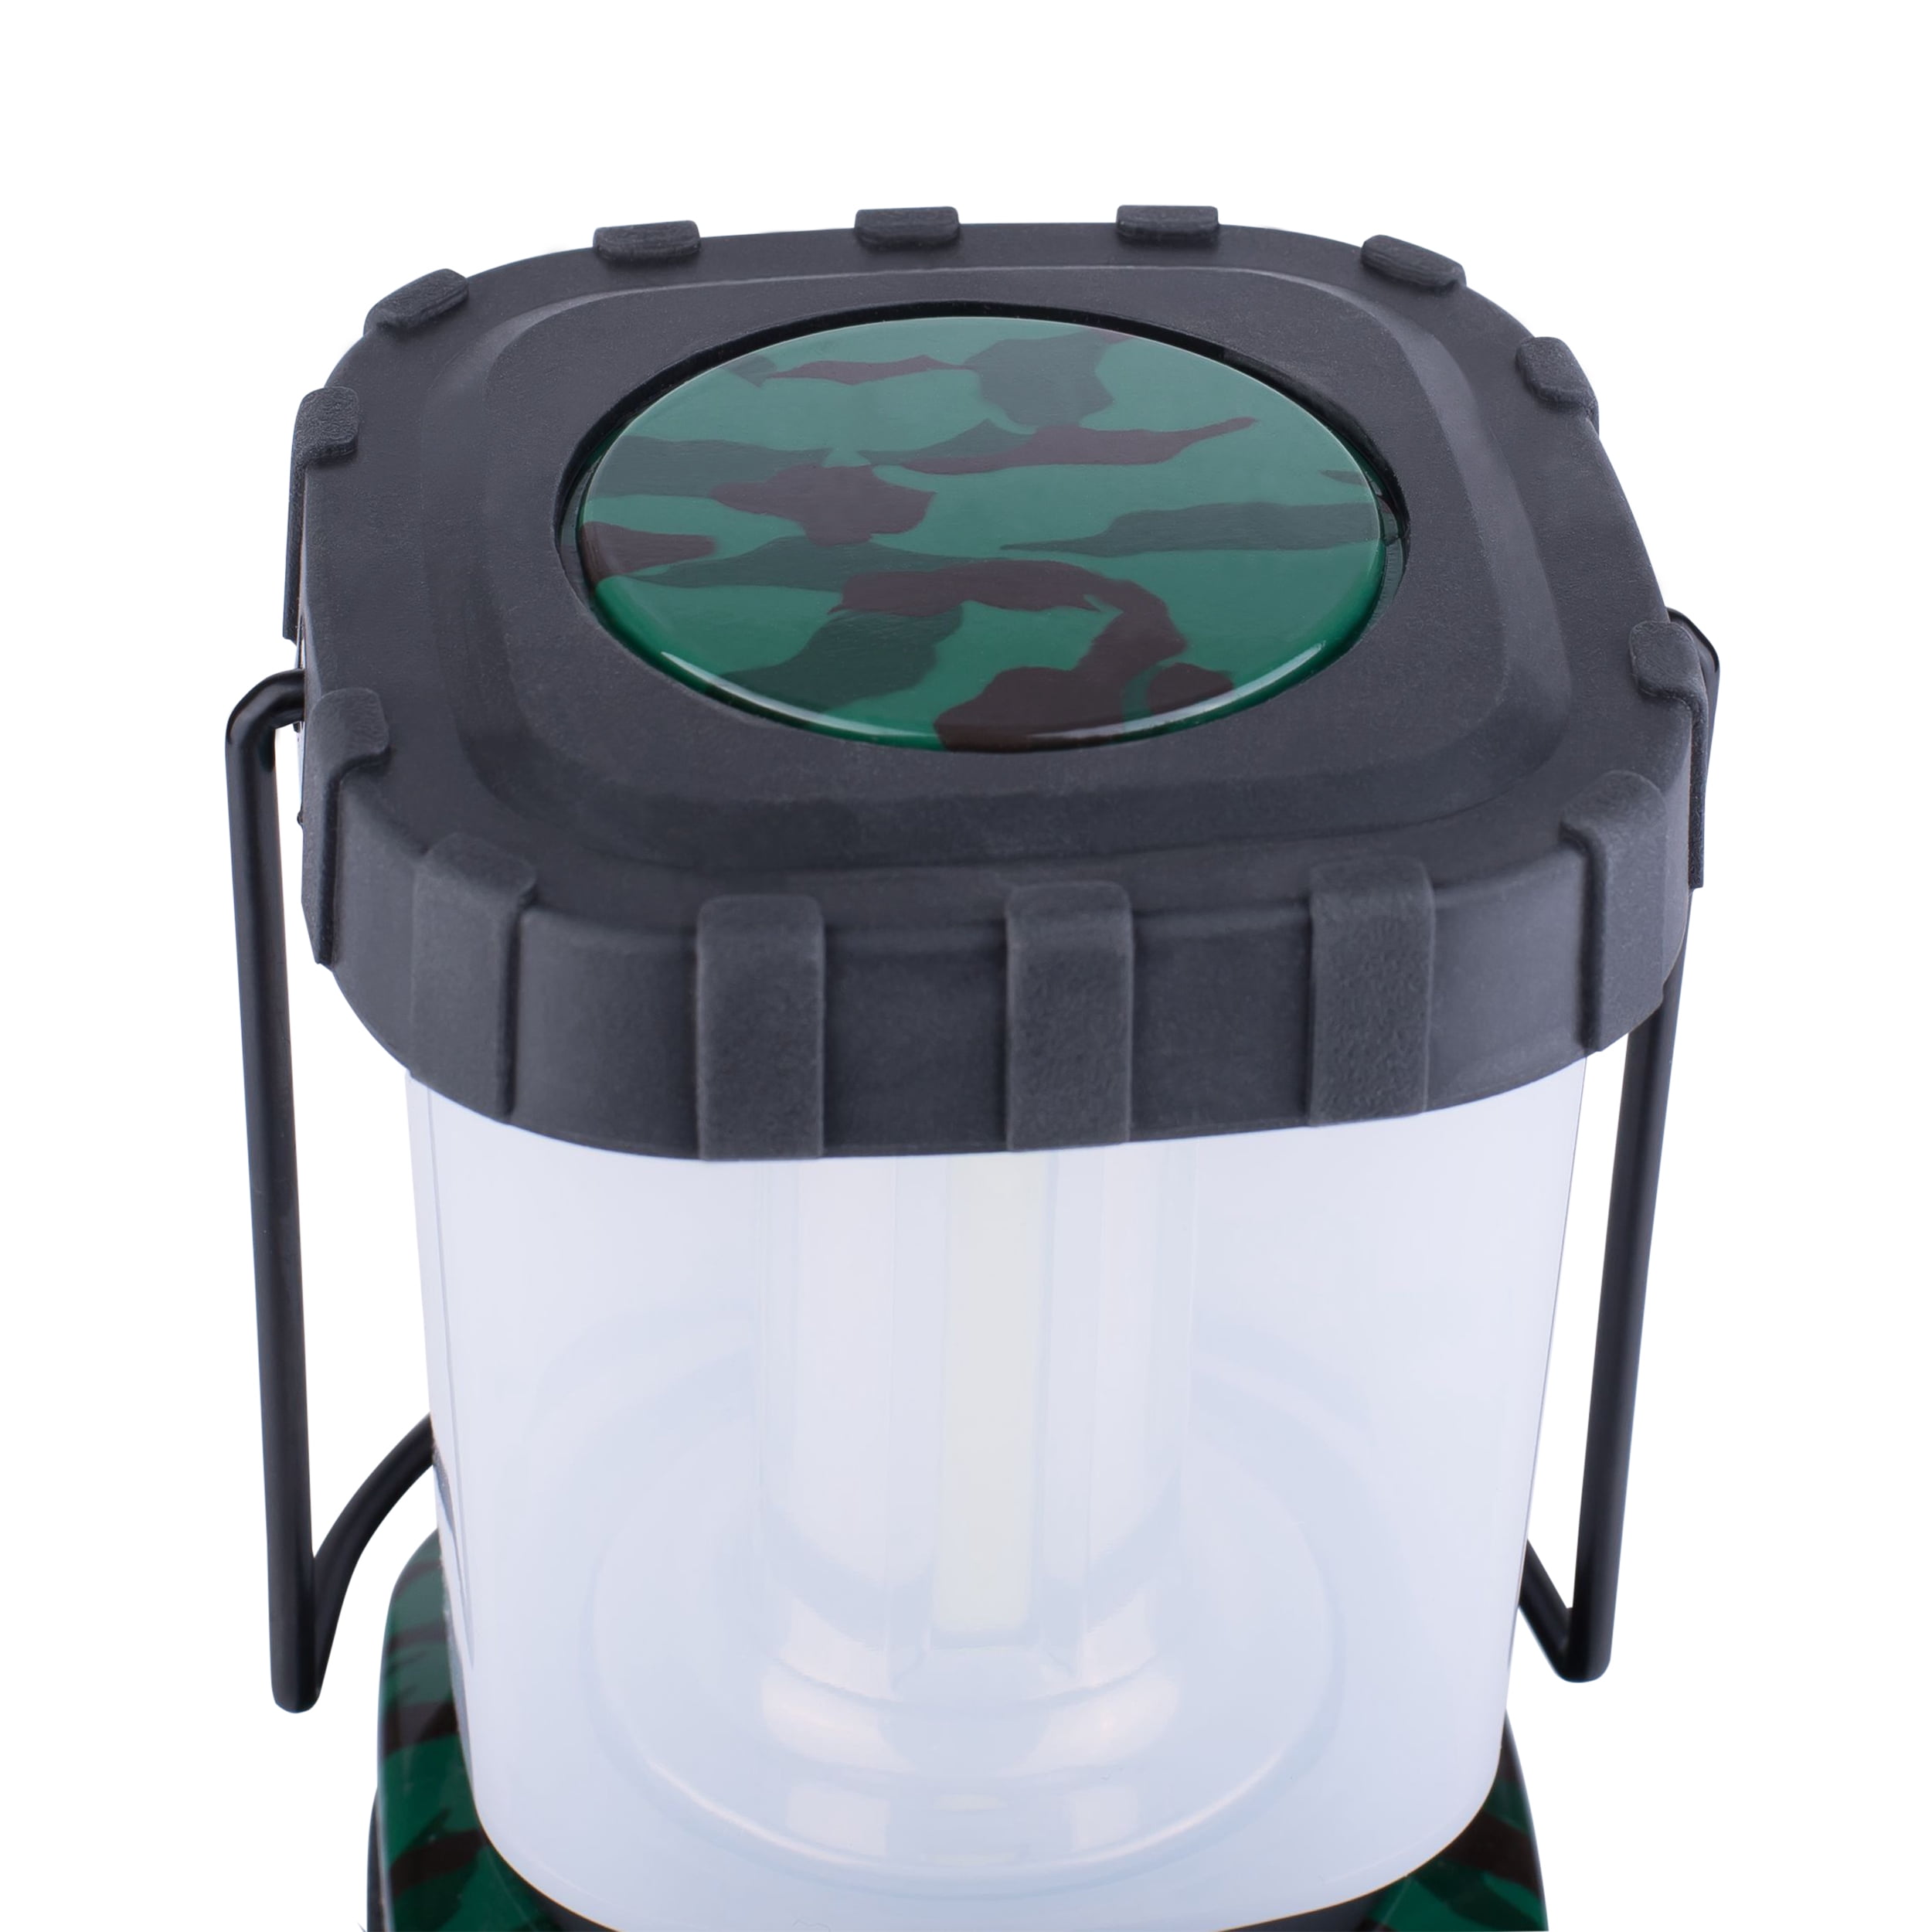 Blazin 750 Lumen Battery Powered Storm Lantern for Power Outages